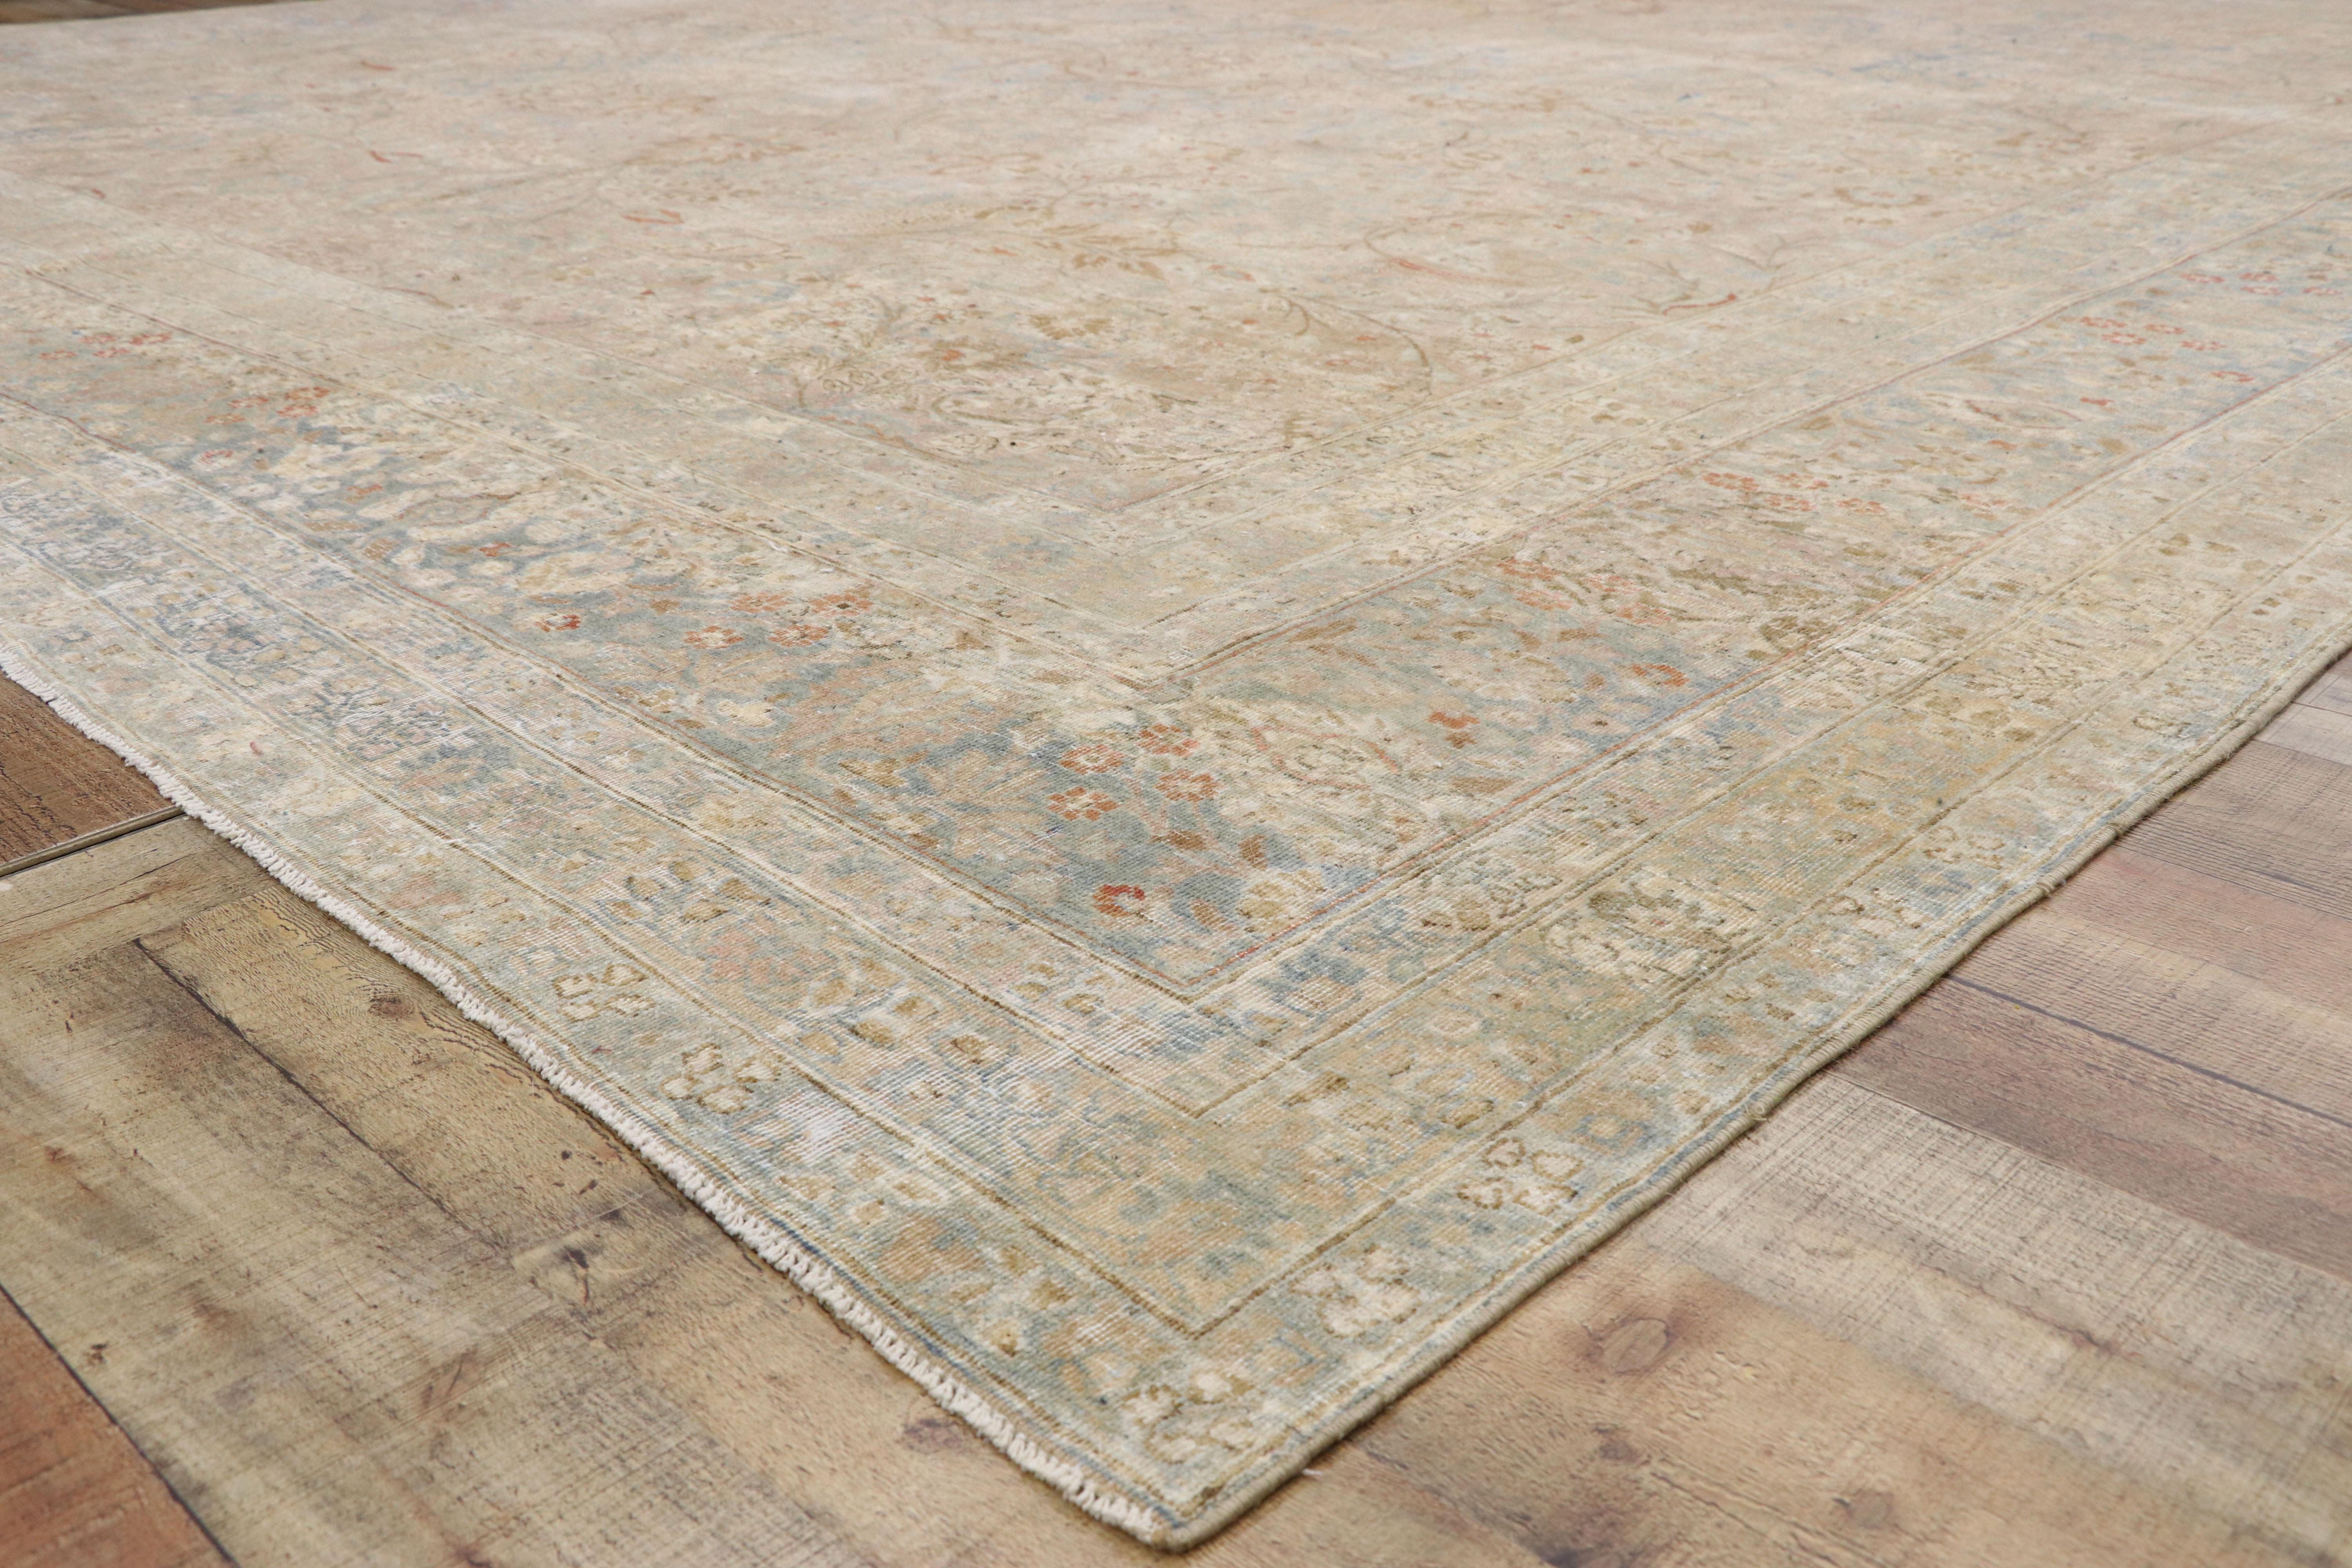 19th Century Distressed Antique Persian Khorassan Design Rug with Rustic English Manor Style